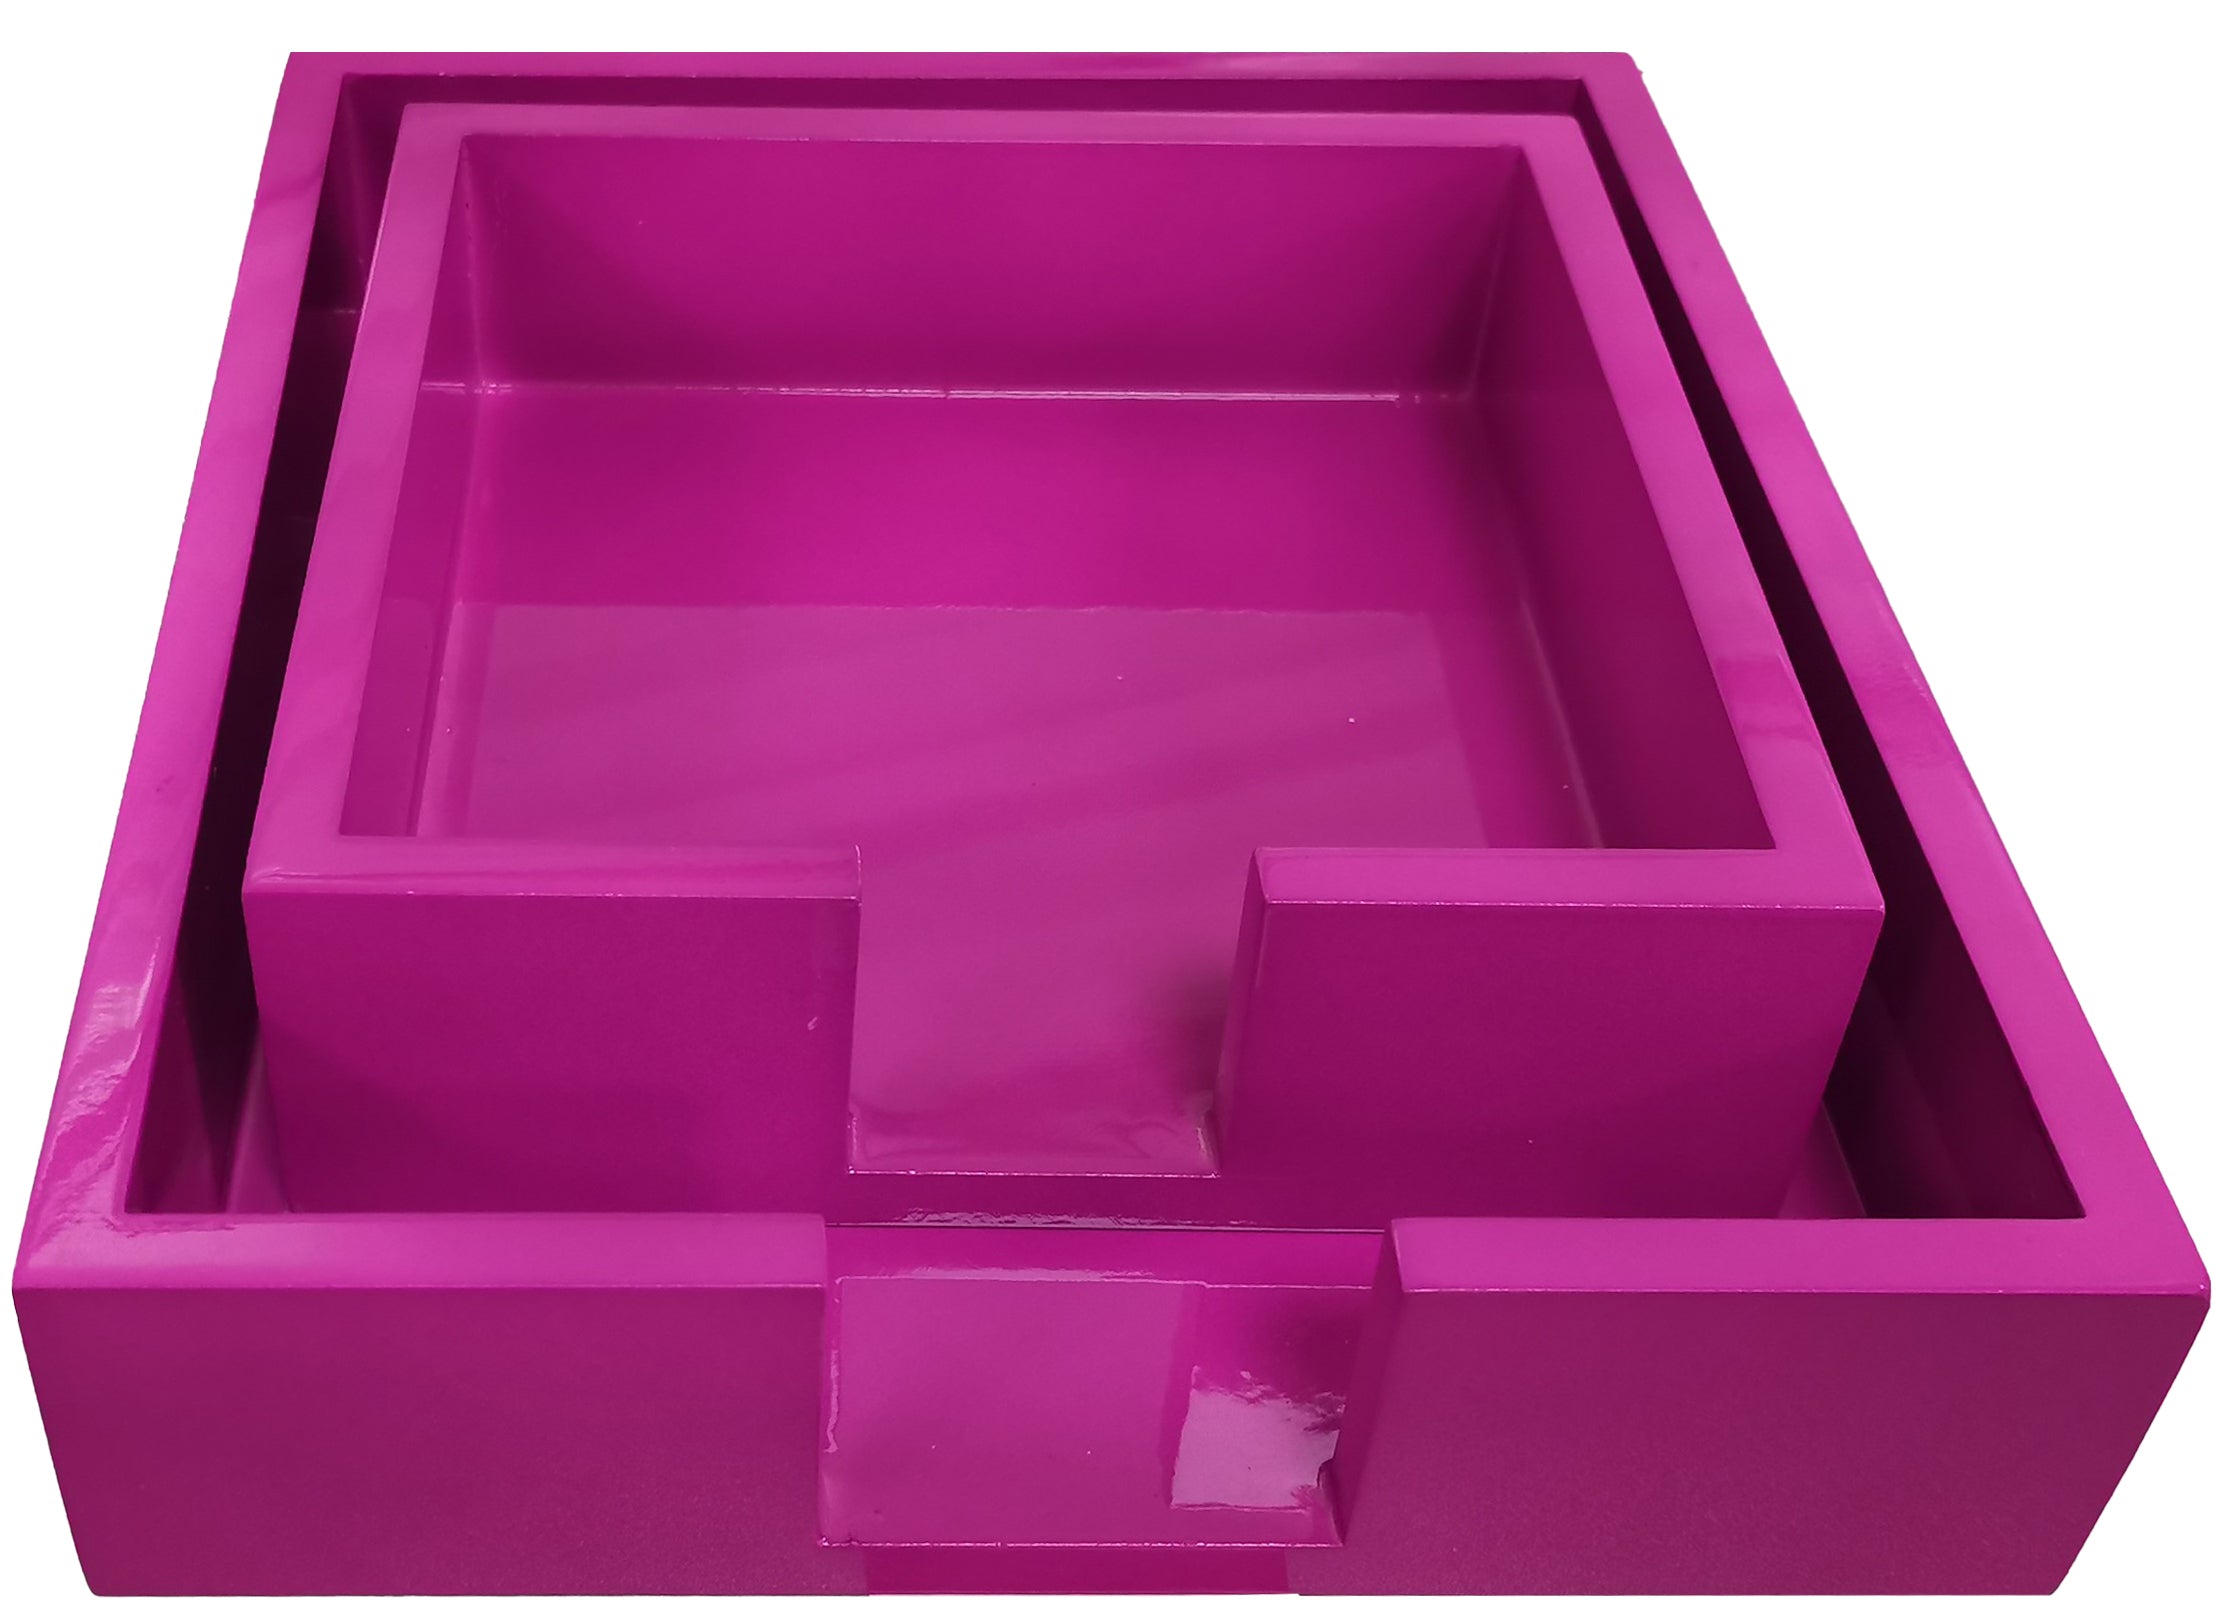 Small Lacquer Tray - The Brights